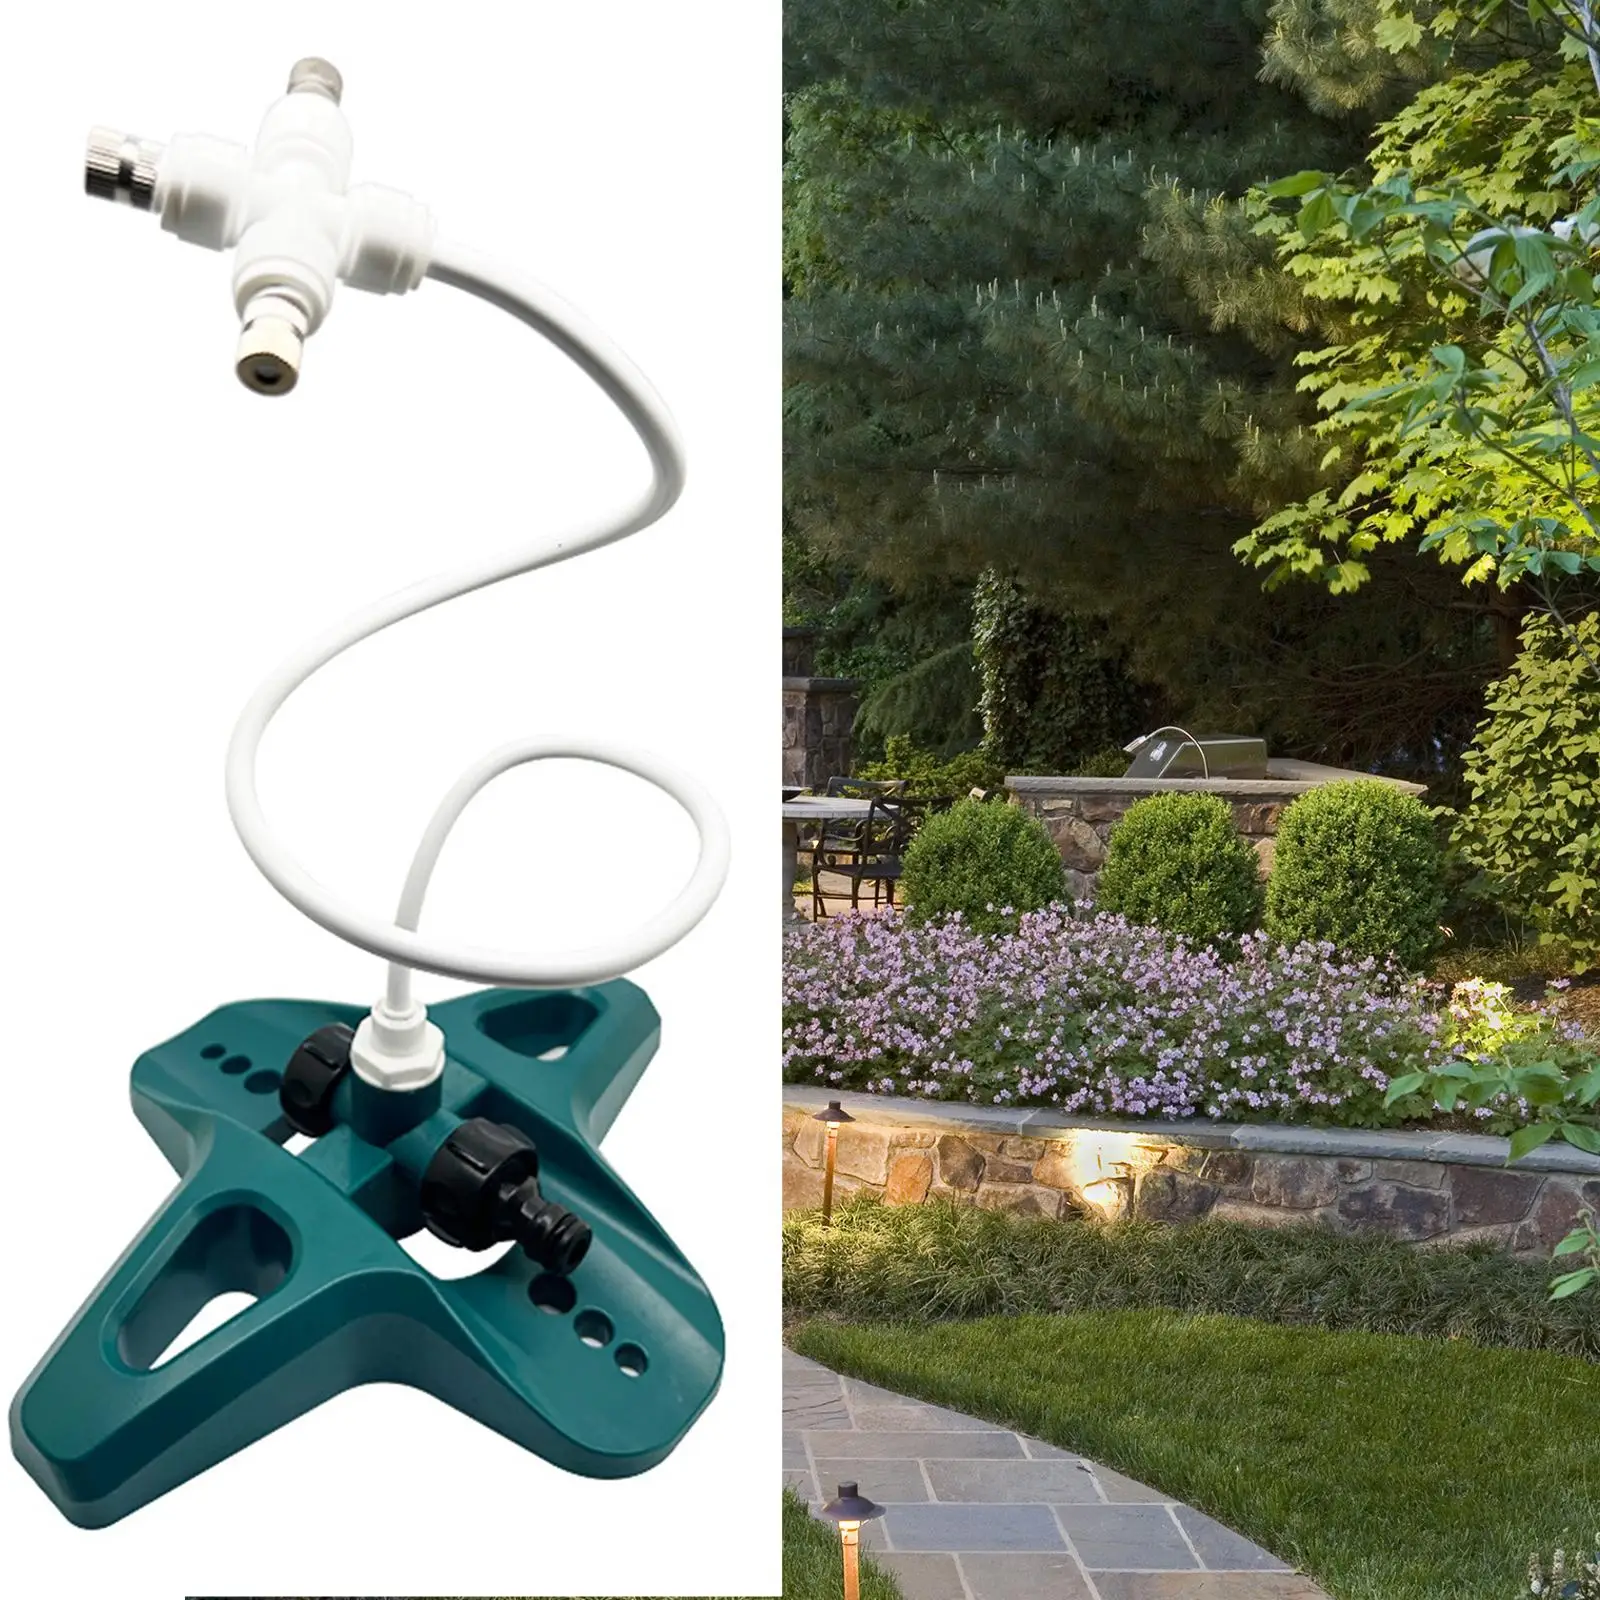 Portable Mist Sprinklers No Leakage Durable Outside Misters System for BBQ Garden Outside Patio cool party Bath